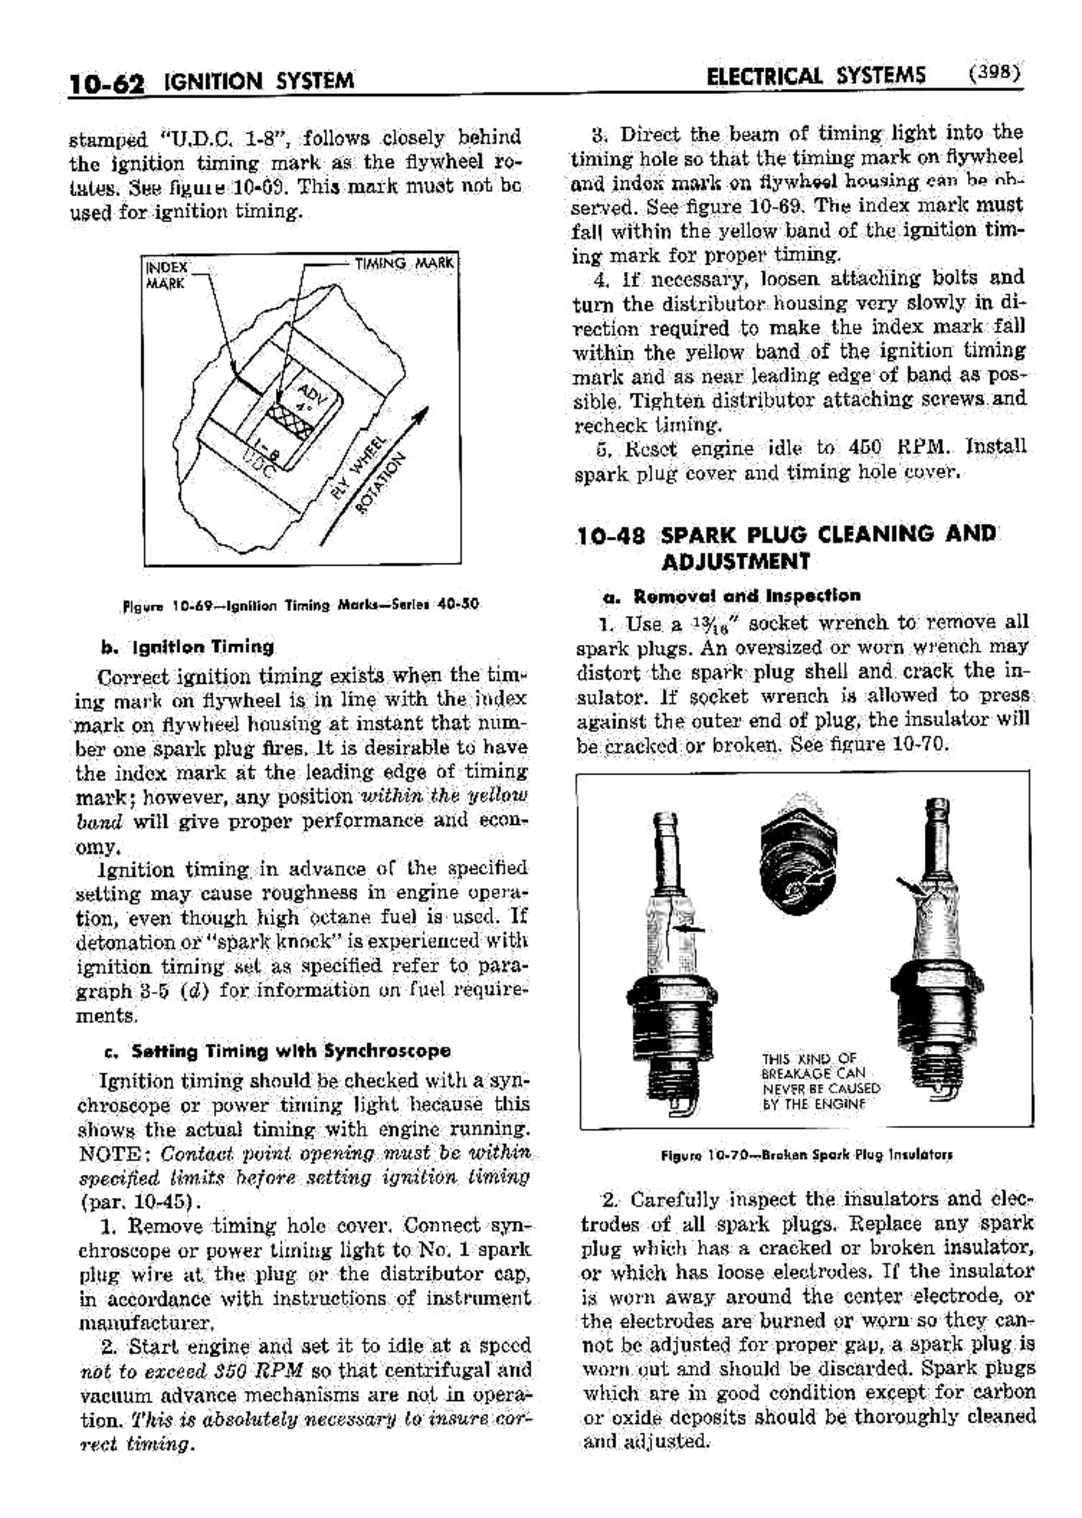 n_11 1952 Buick Shop Manual - Electrical Systems-062-062.jpg